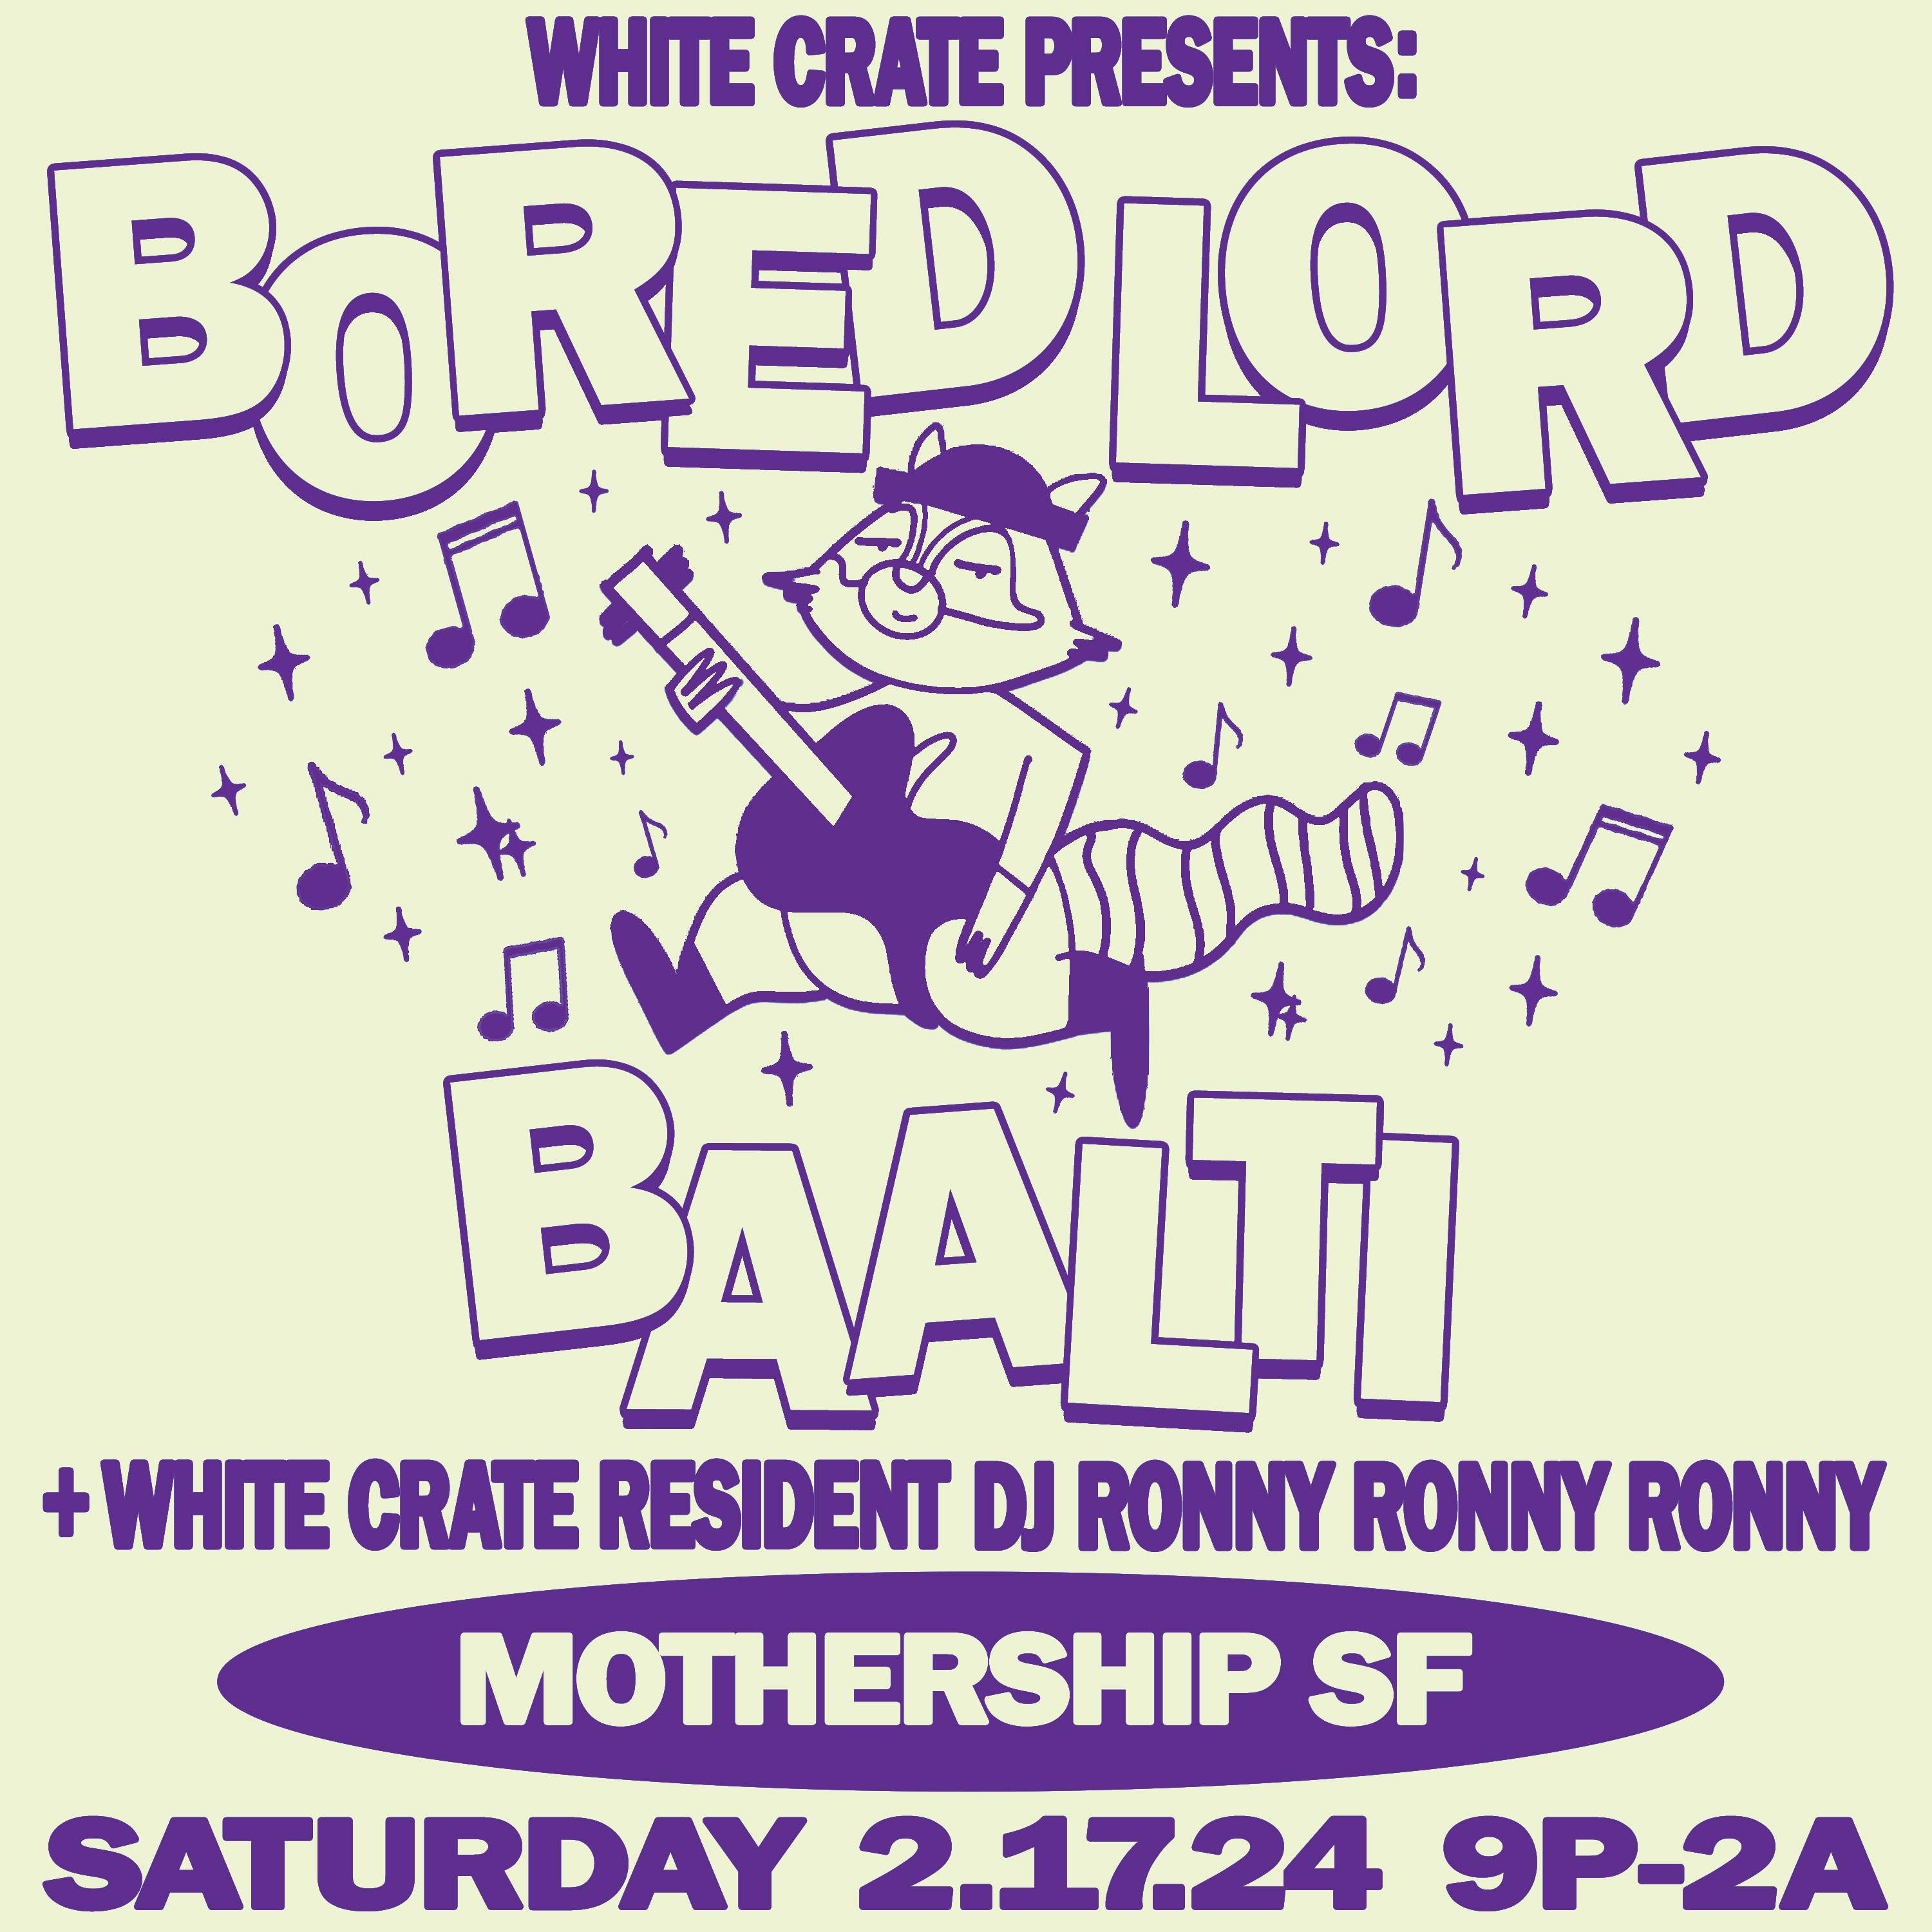 White Crate presents Baalti & Bored Lord - フライヤー表